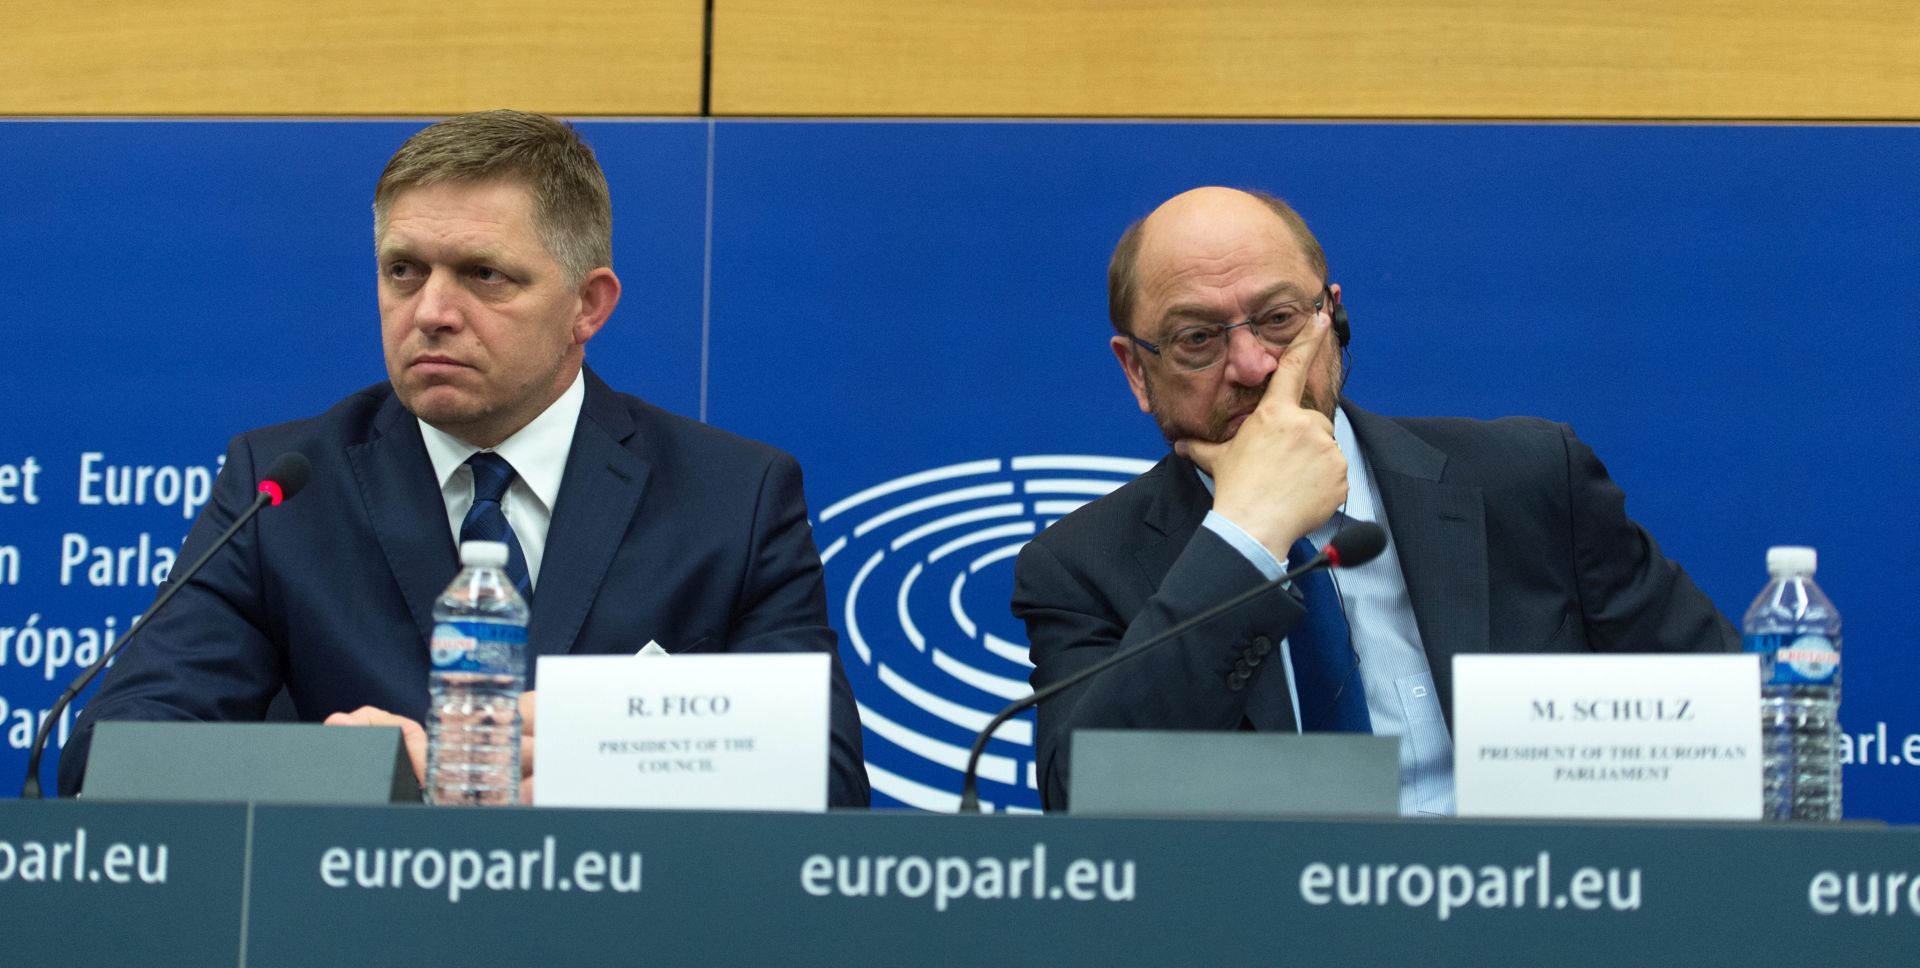 epa05410176 Slovakian Prime Minister Robert Fico (L) and Martin Schulz (R), President of the European Parliament, react during a press conference in the European Parliament in Strasbourg, France, 06 July 2016. Council and Commission statements on the Programme of activities of the EU's Slovakian Presidency were due to be delivered to the parliament.  EPA/PATRICK SEEGER